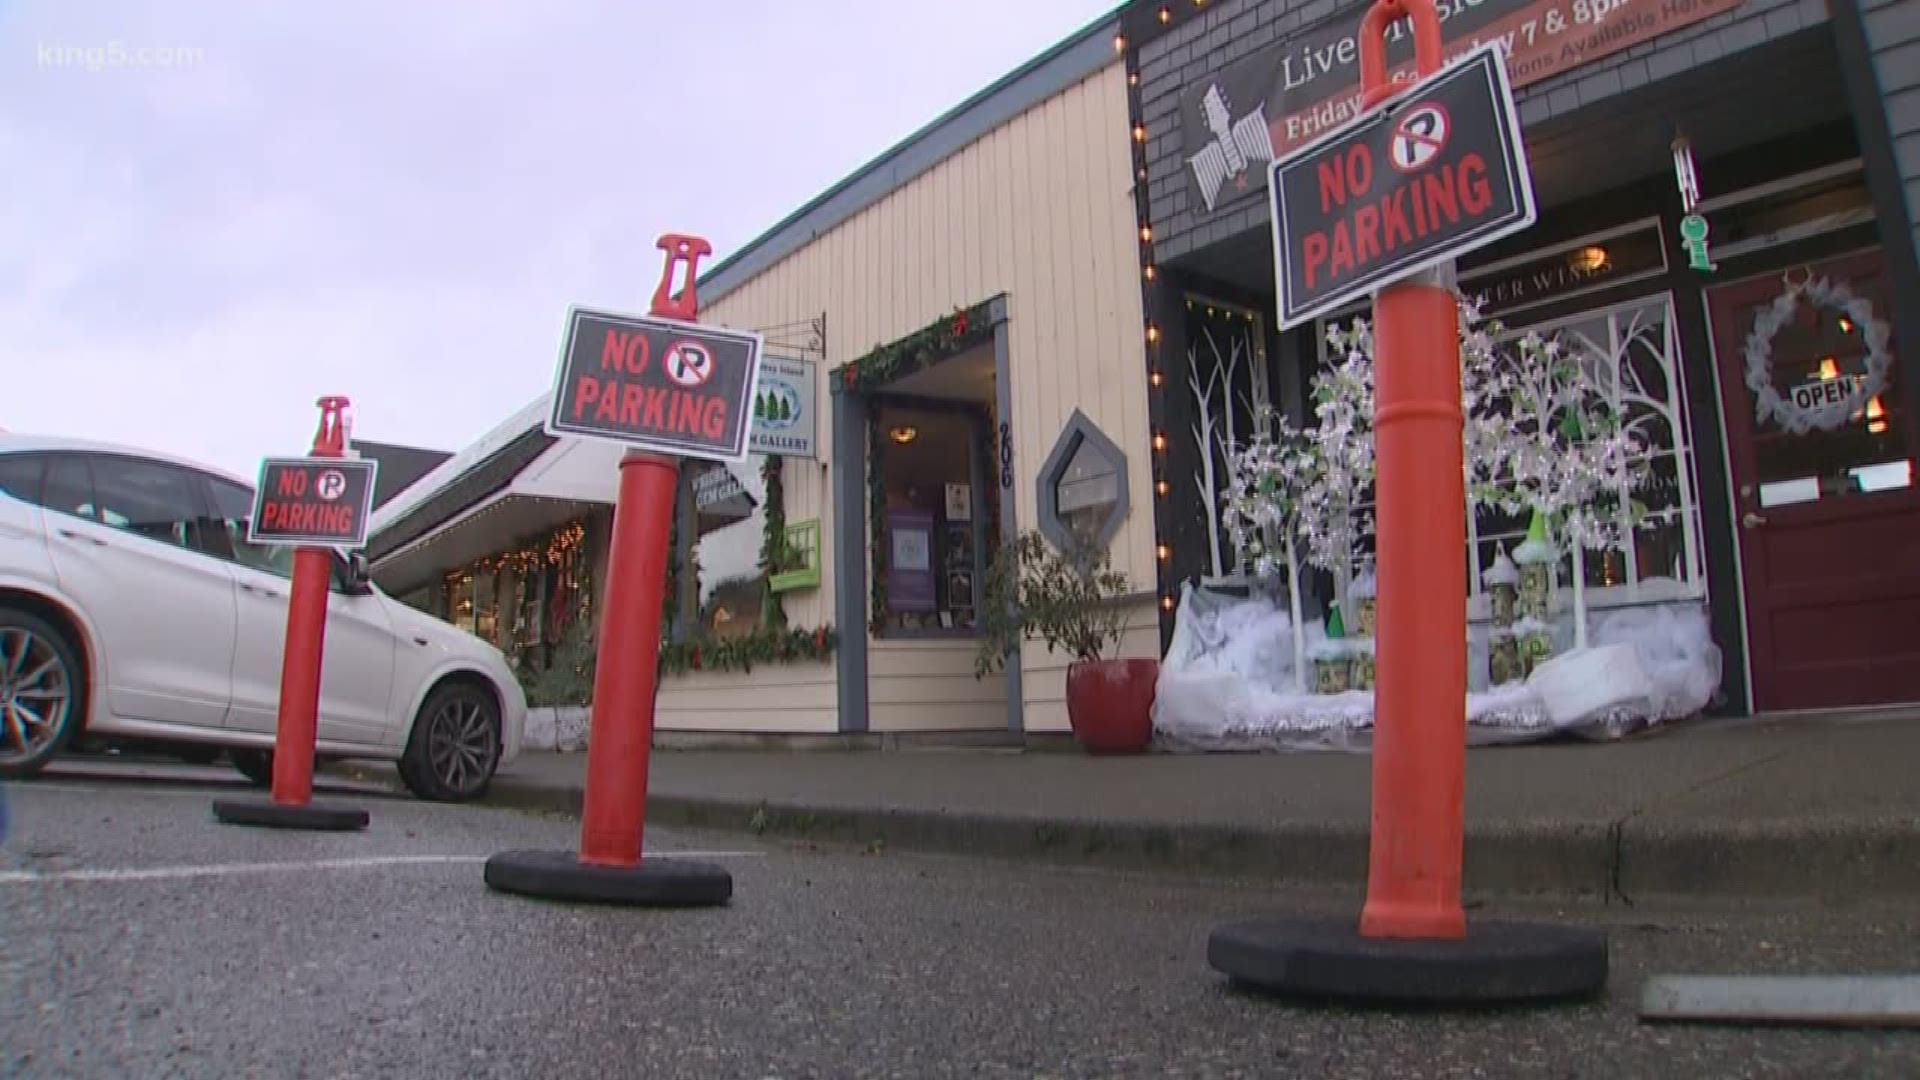 Langley is putting a hold on some road construction after an outcry from local business owners who say the work was interfering with their holiday shopping season.